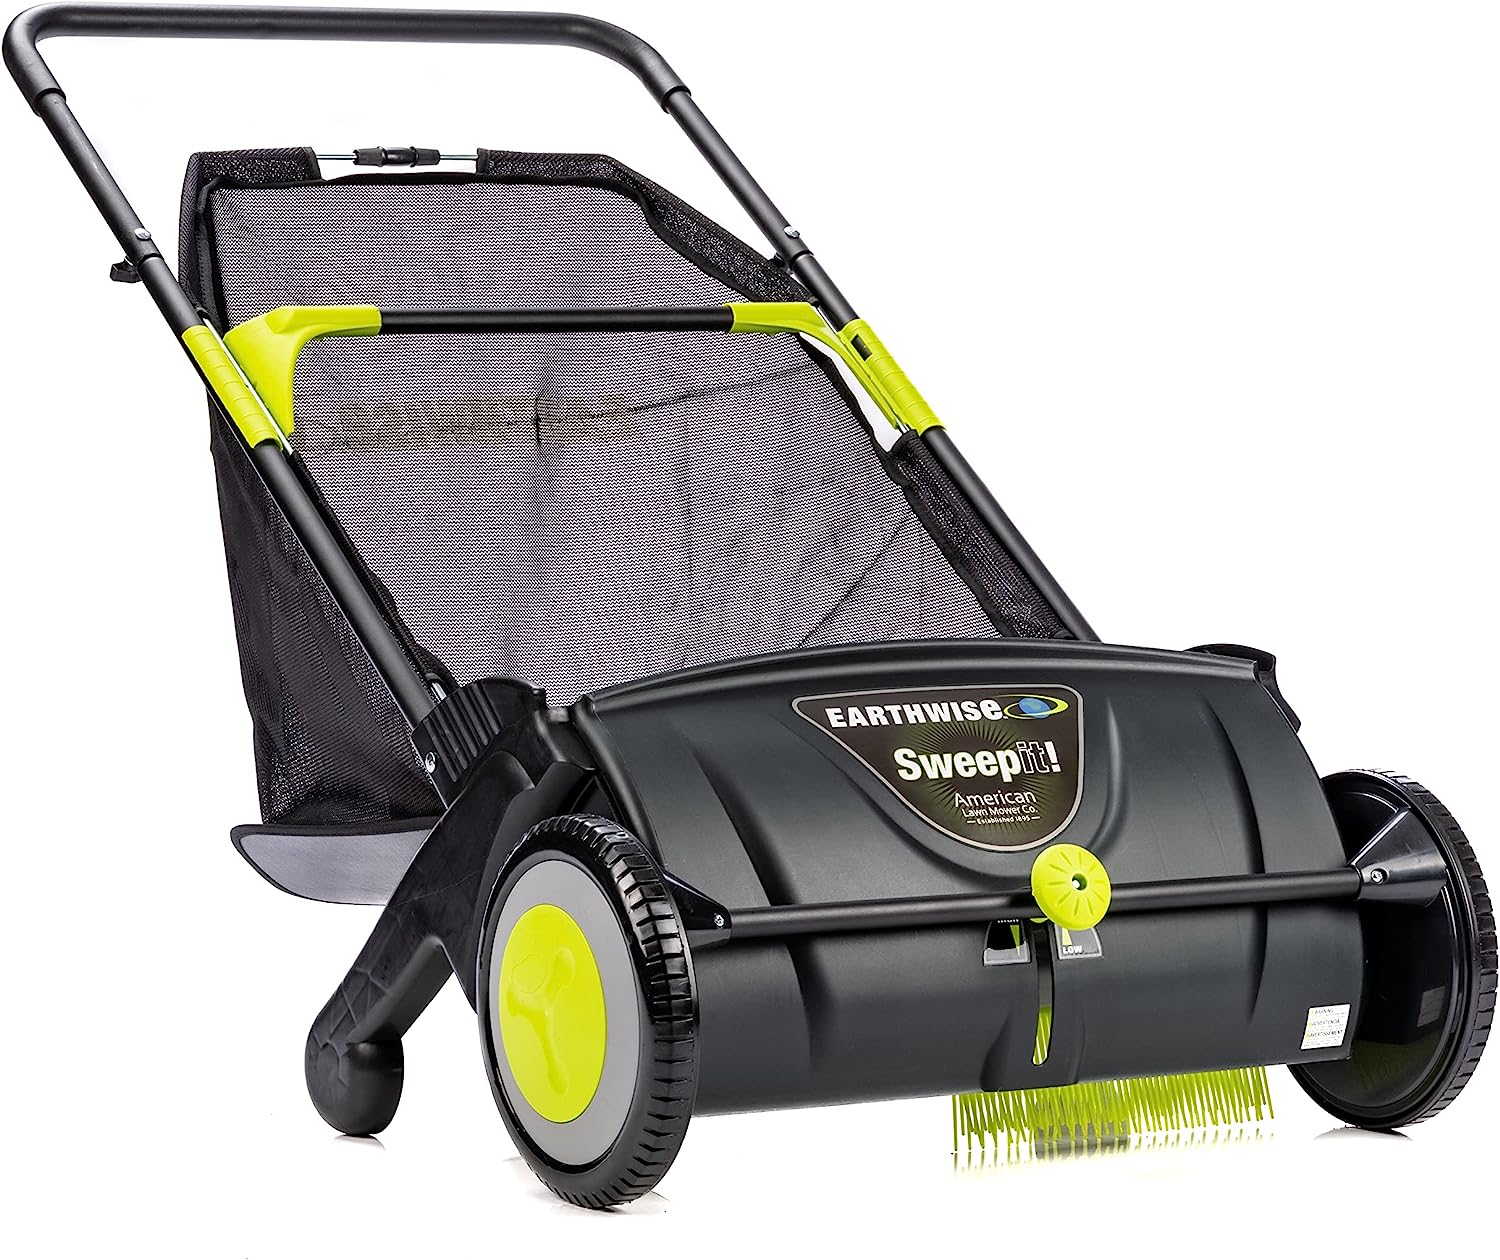 grass sweeper detailed review